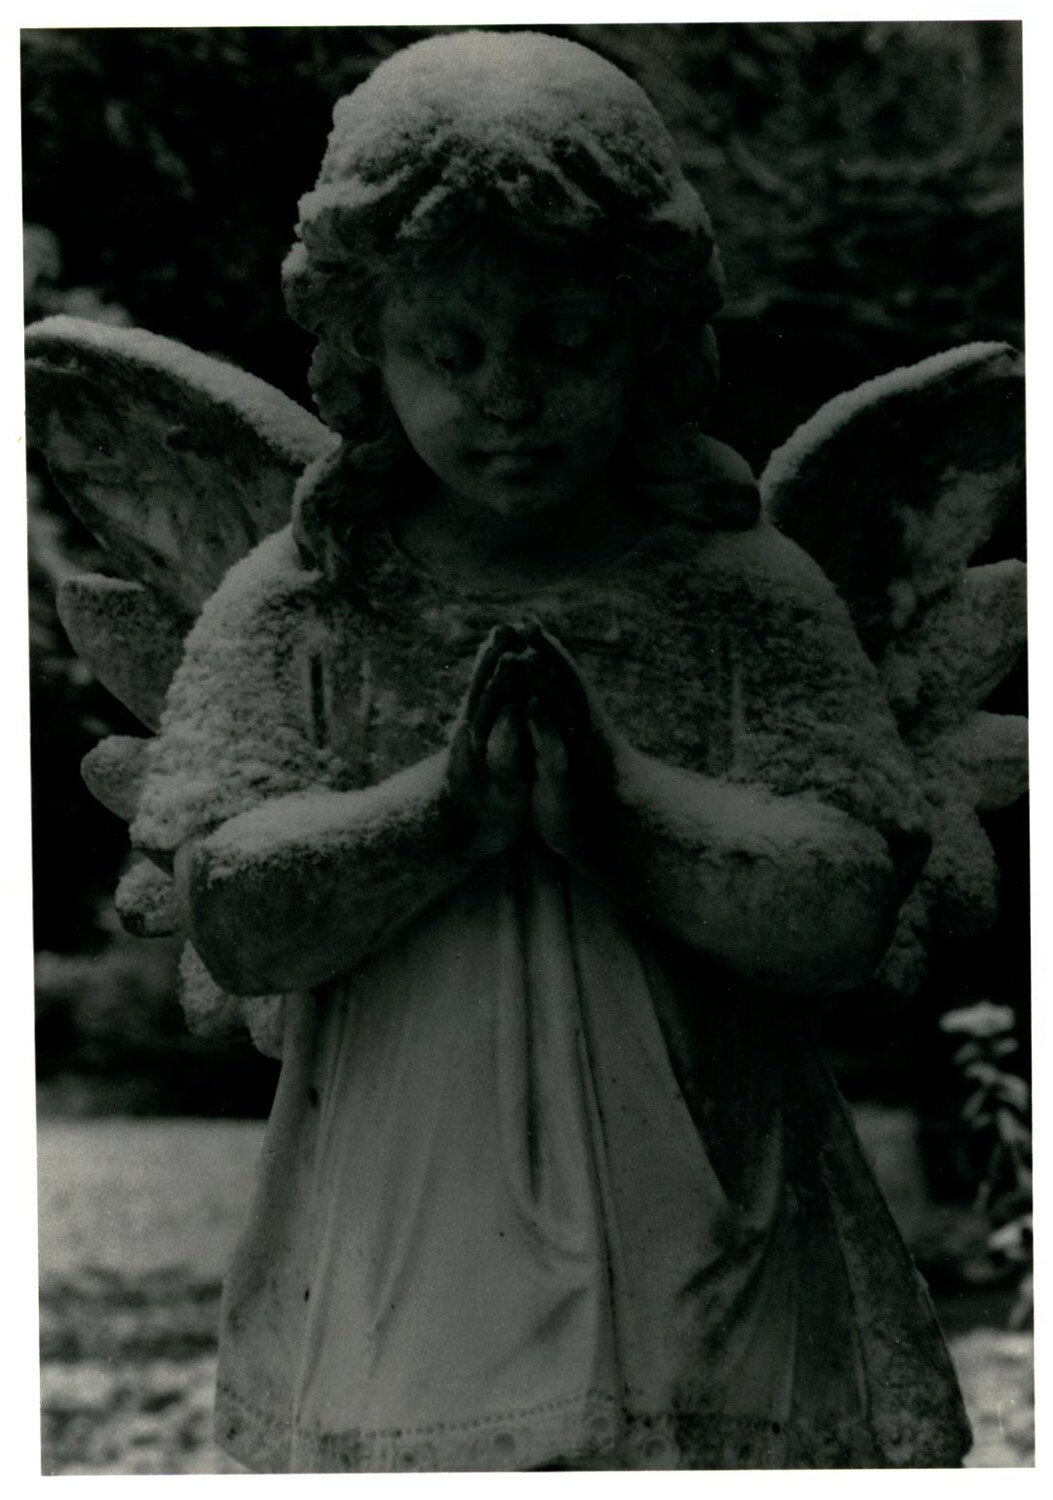   Sarah Will Harris statue, Oak Cemetery , 1974 Silver Gelatin Print 5 × 3 1/2 in. (image size) The Do Good Fund, Inc., 2017-26 